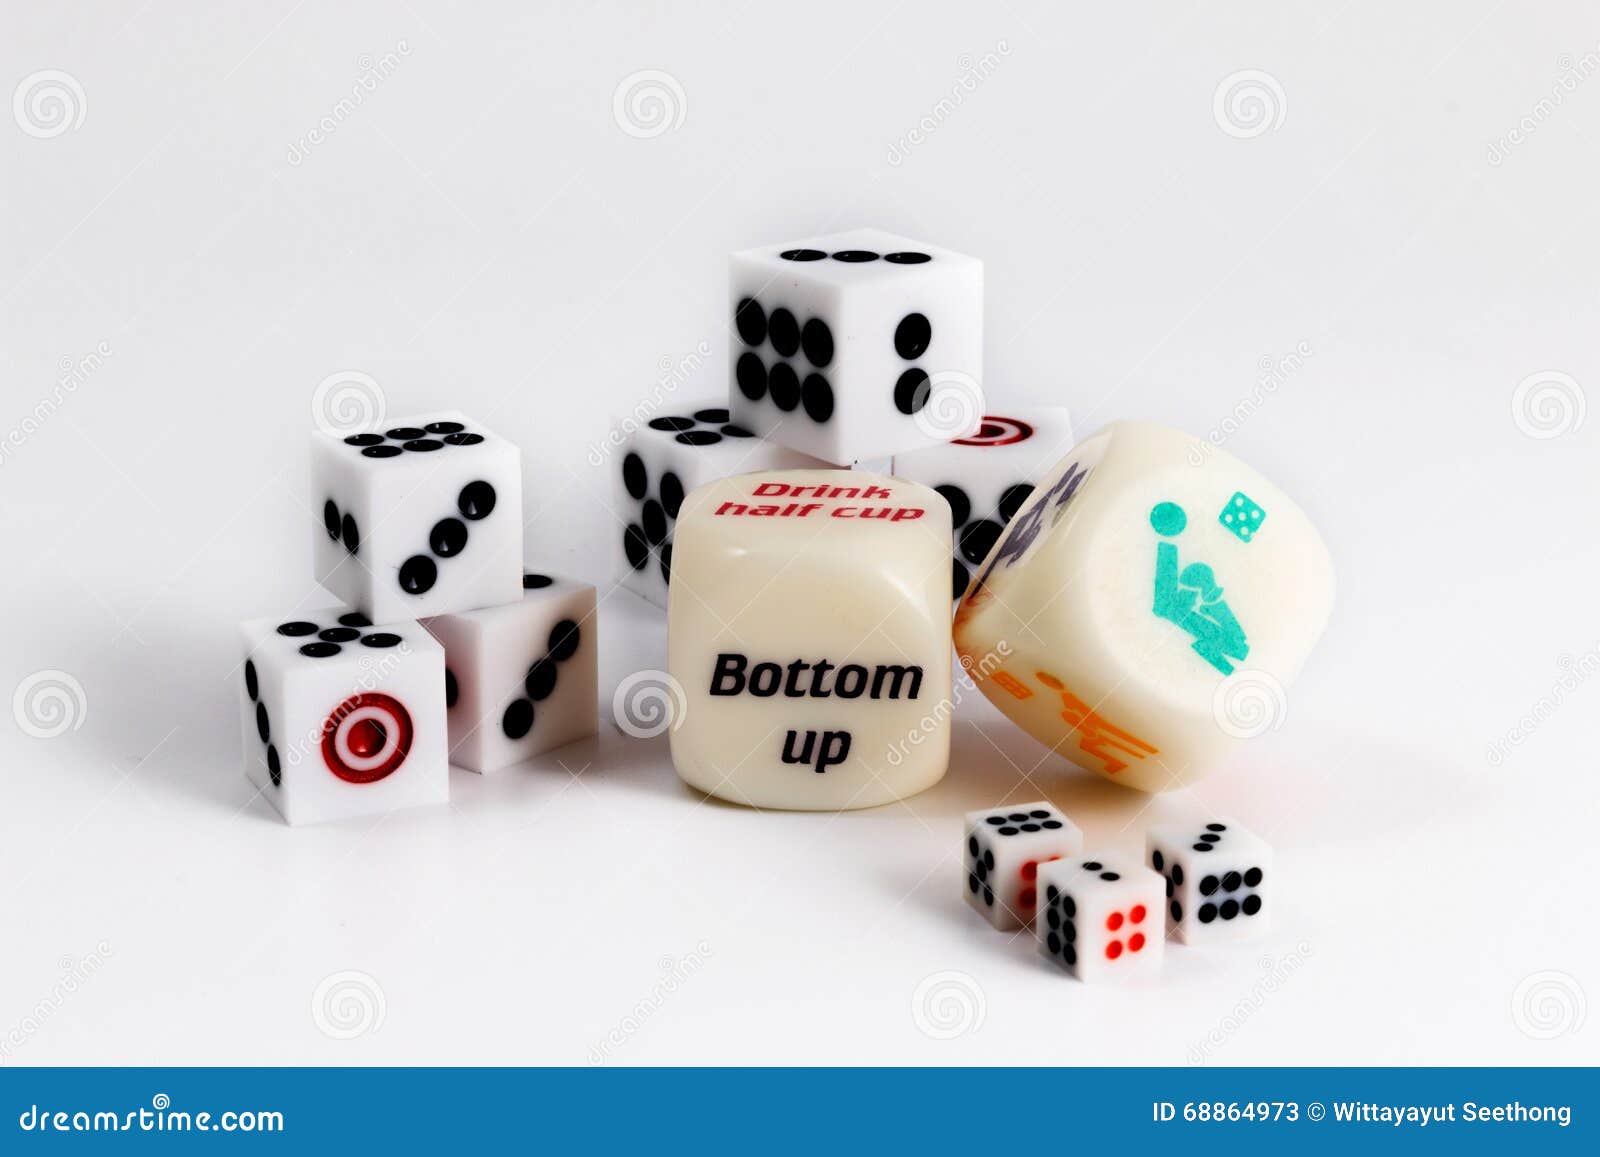 dice sex game. play love games with exotics sex dice.